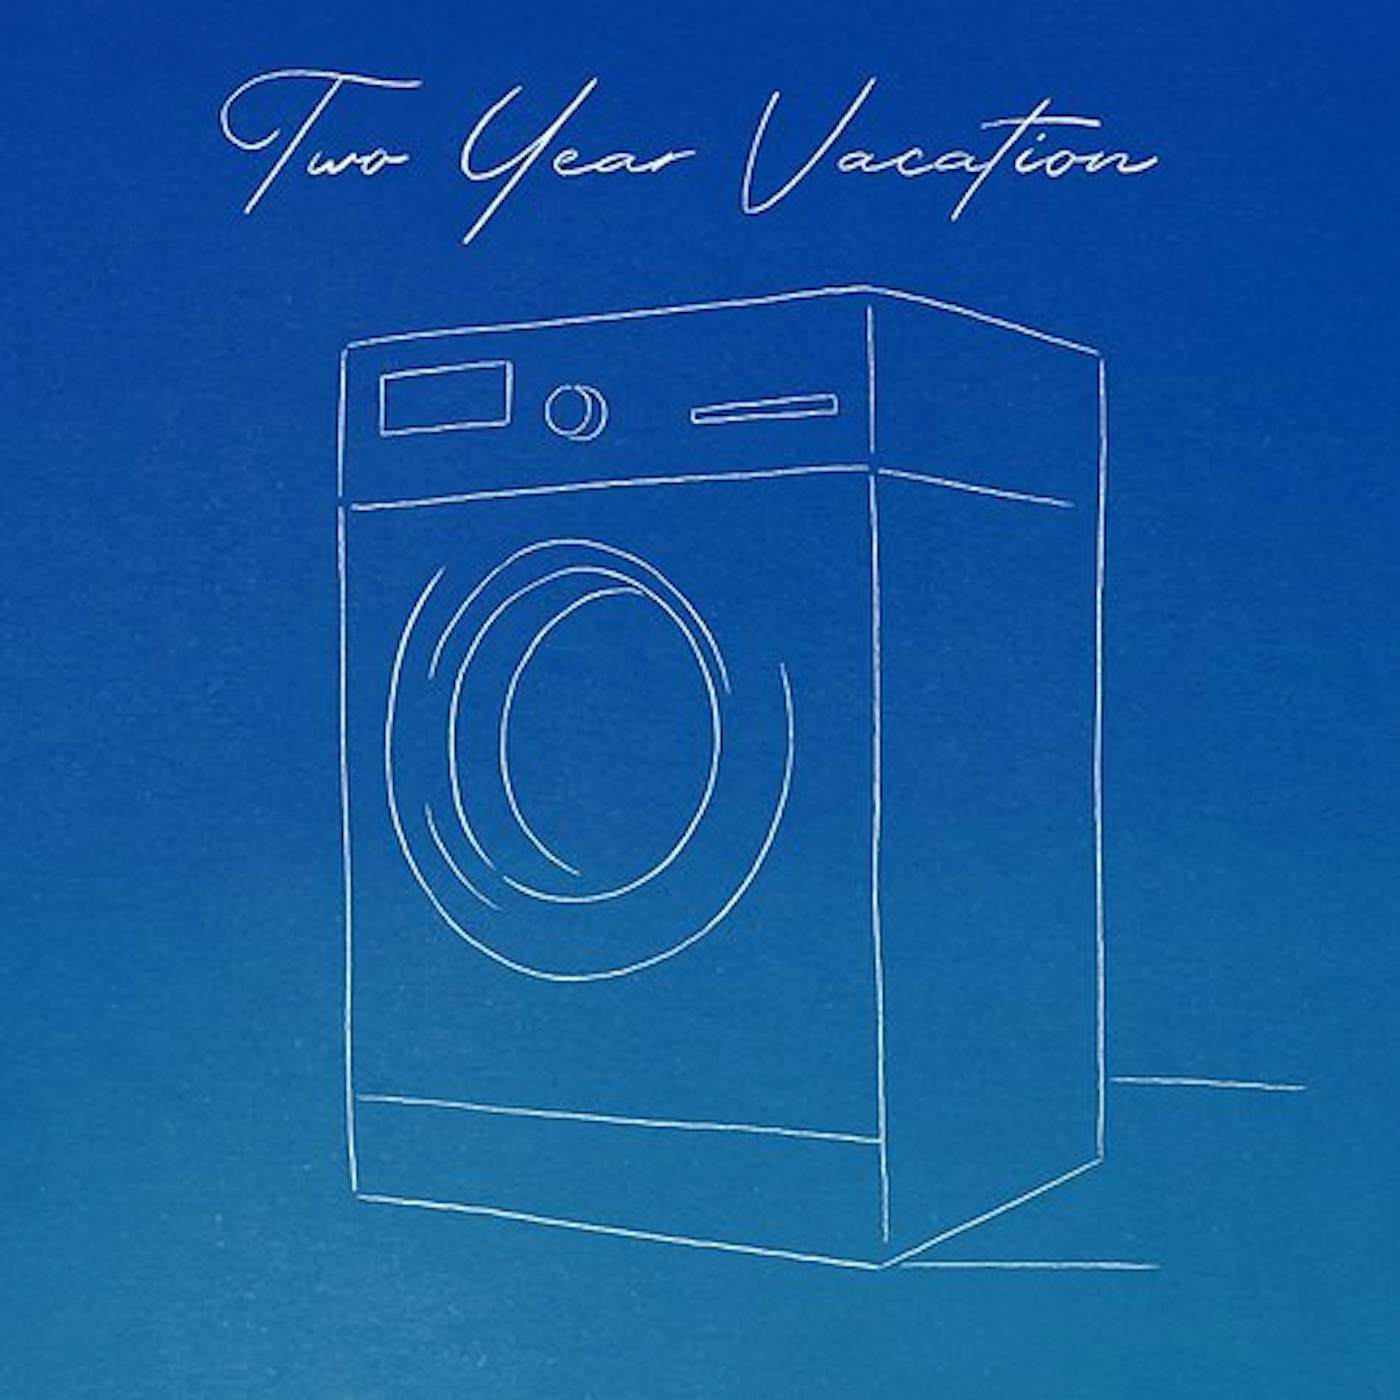 Two Year Vacation Laundry Day Vinyl Record